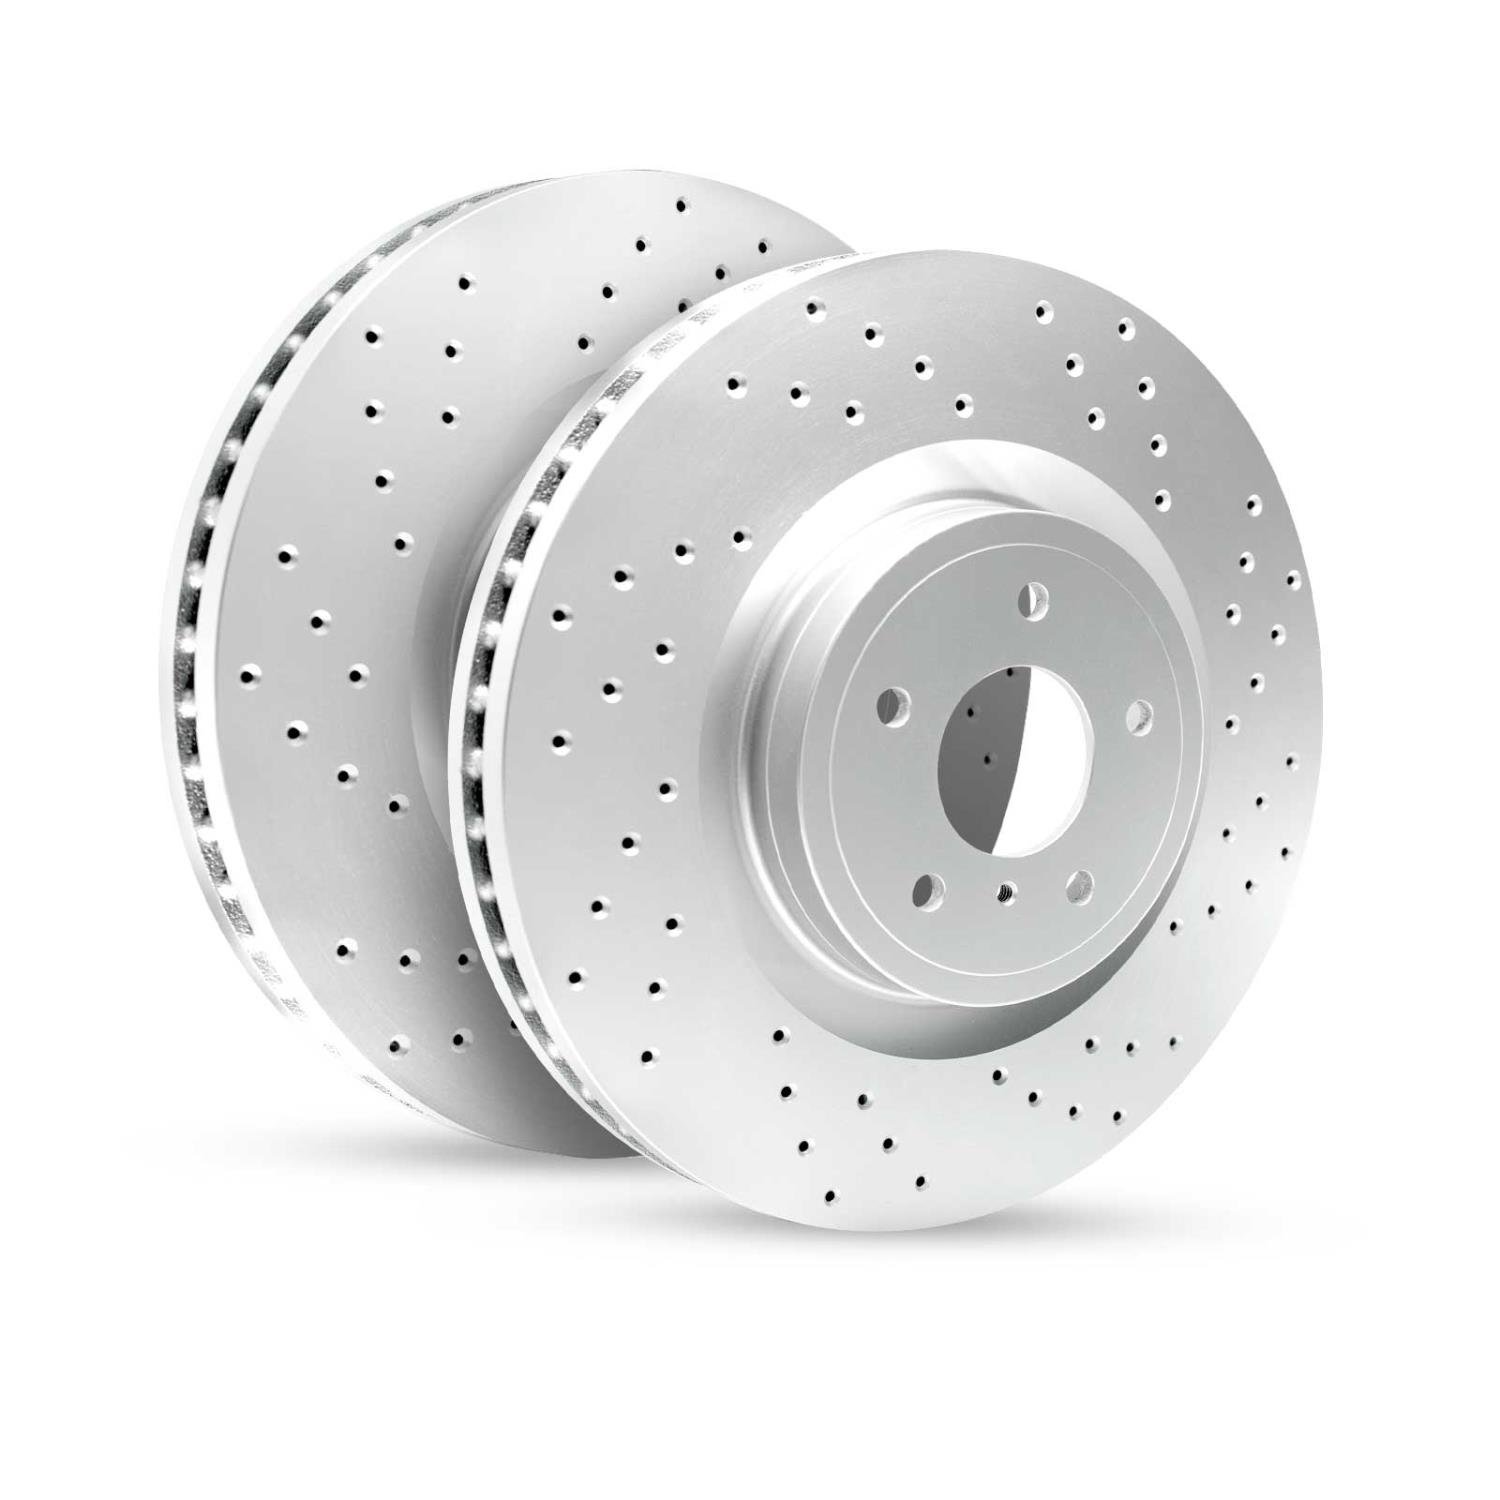 GEO-Carbon Drilled/Slotted Rotors, 2014-2016 Acura/Honda, Position: Rear